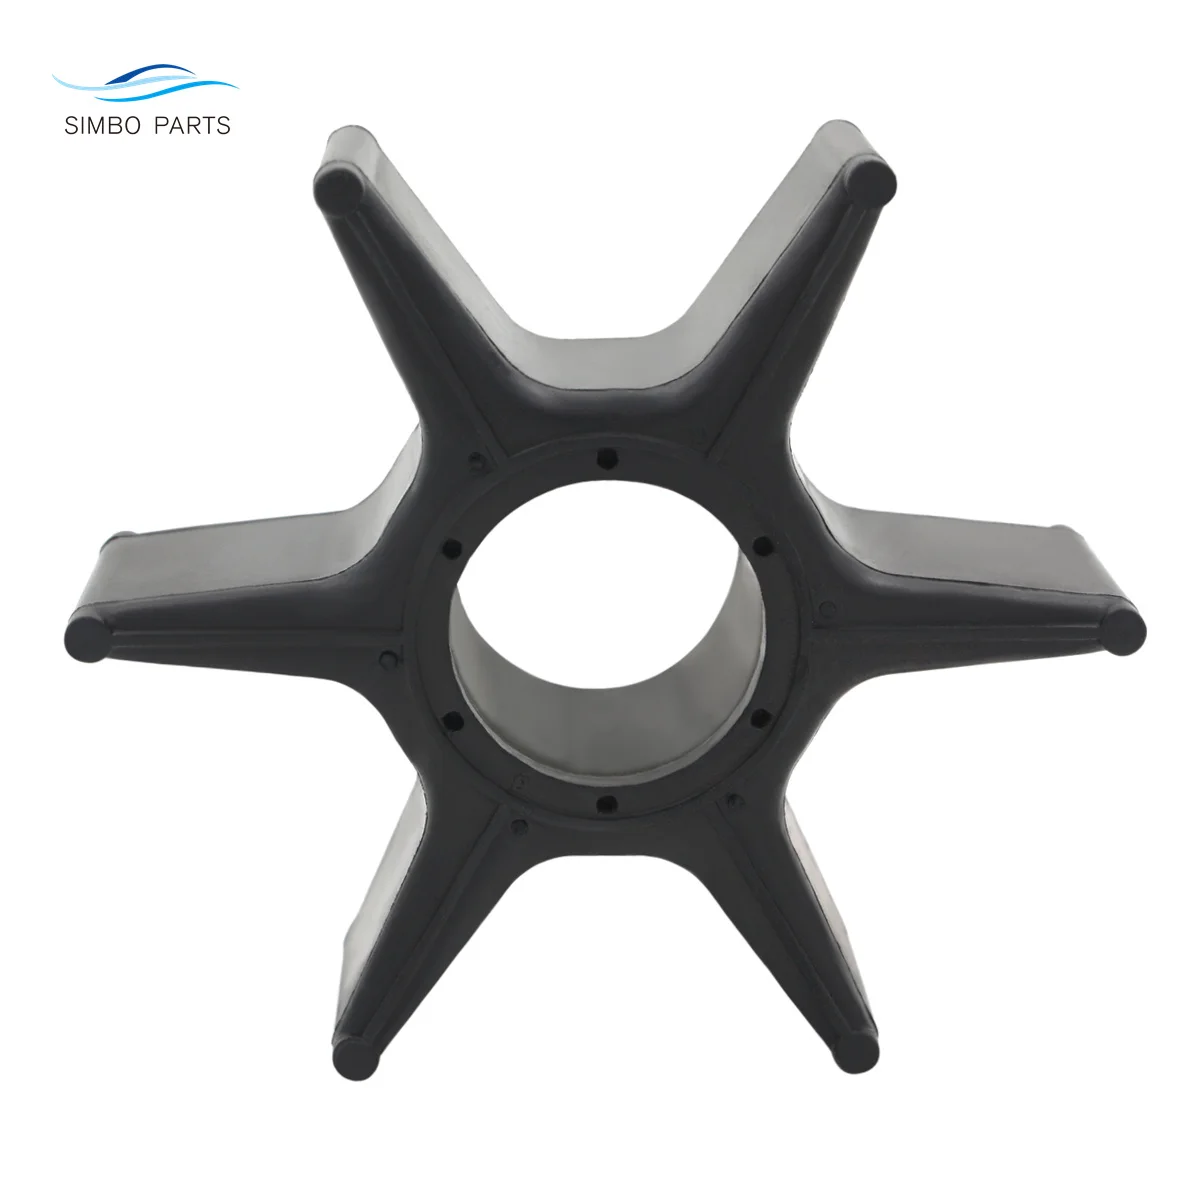 

Water Pump Impeller For Honda Marine Outboard BF 175 200 225 250 HP Motor 19210-ZY3-003 18-3031